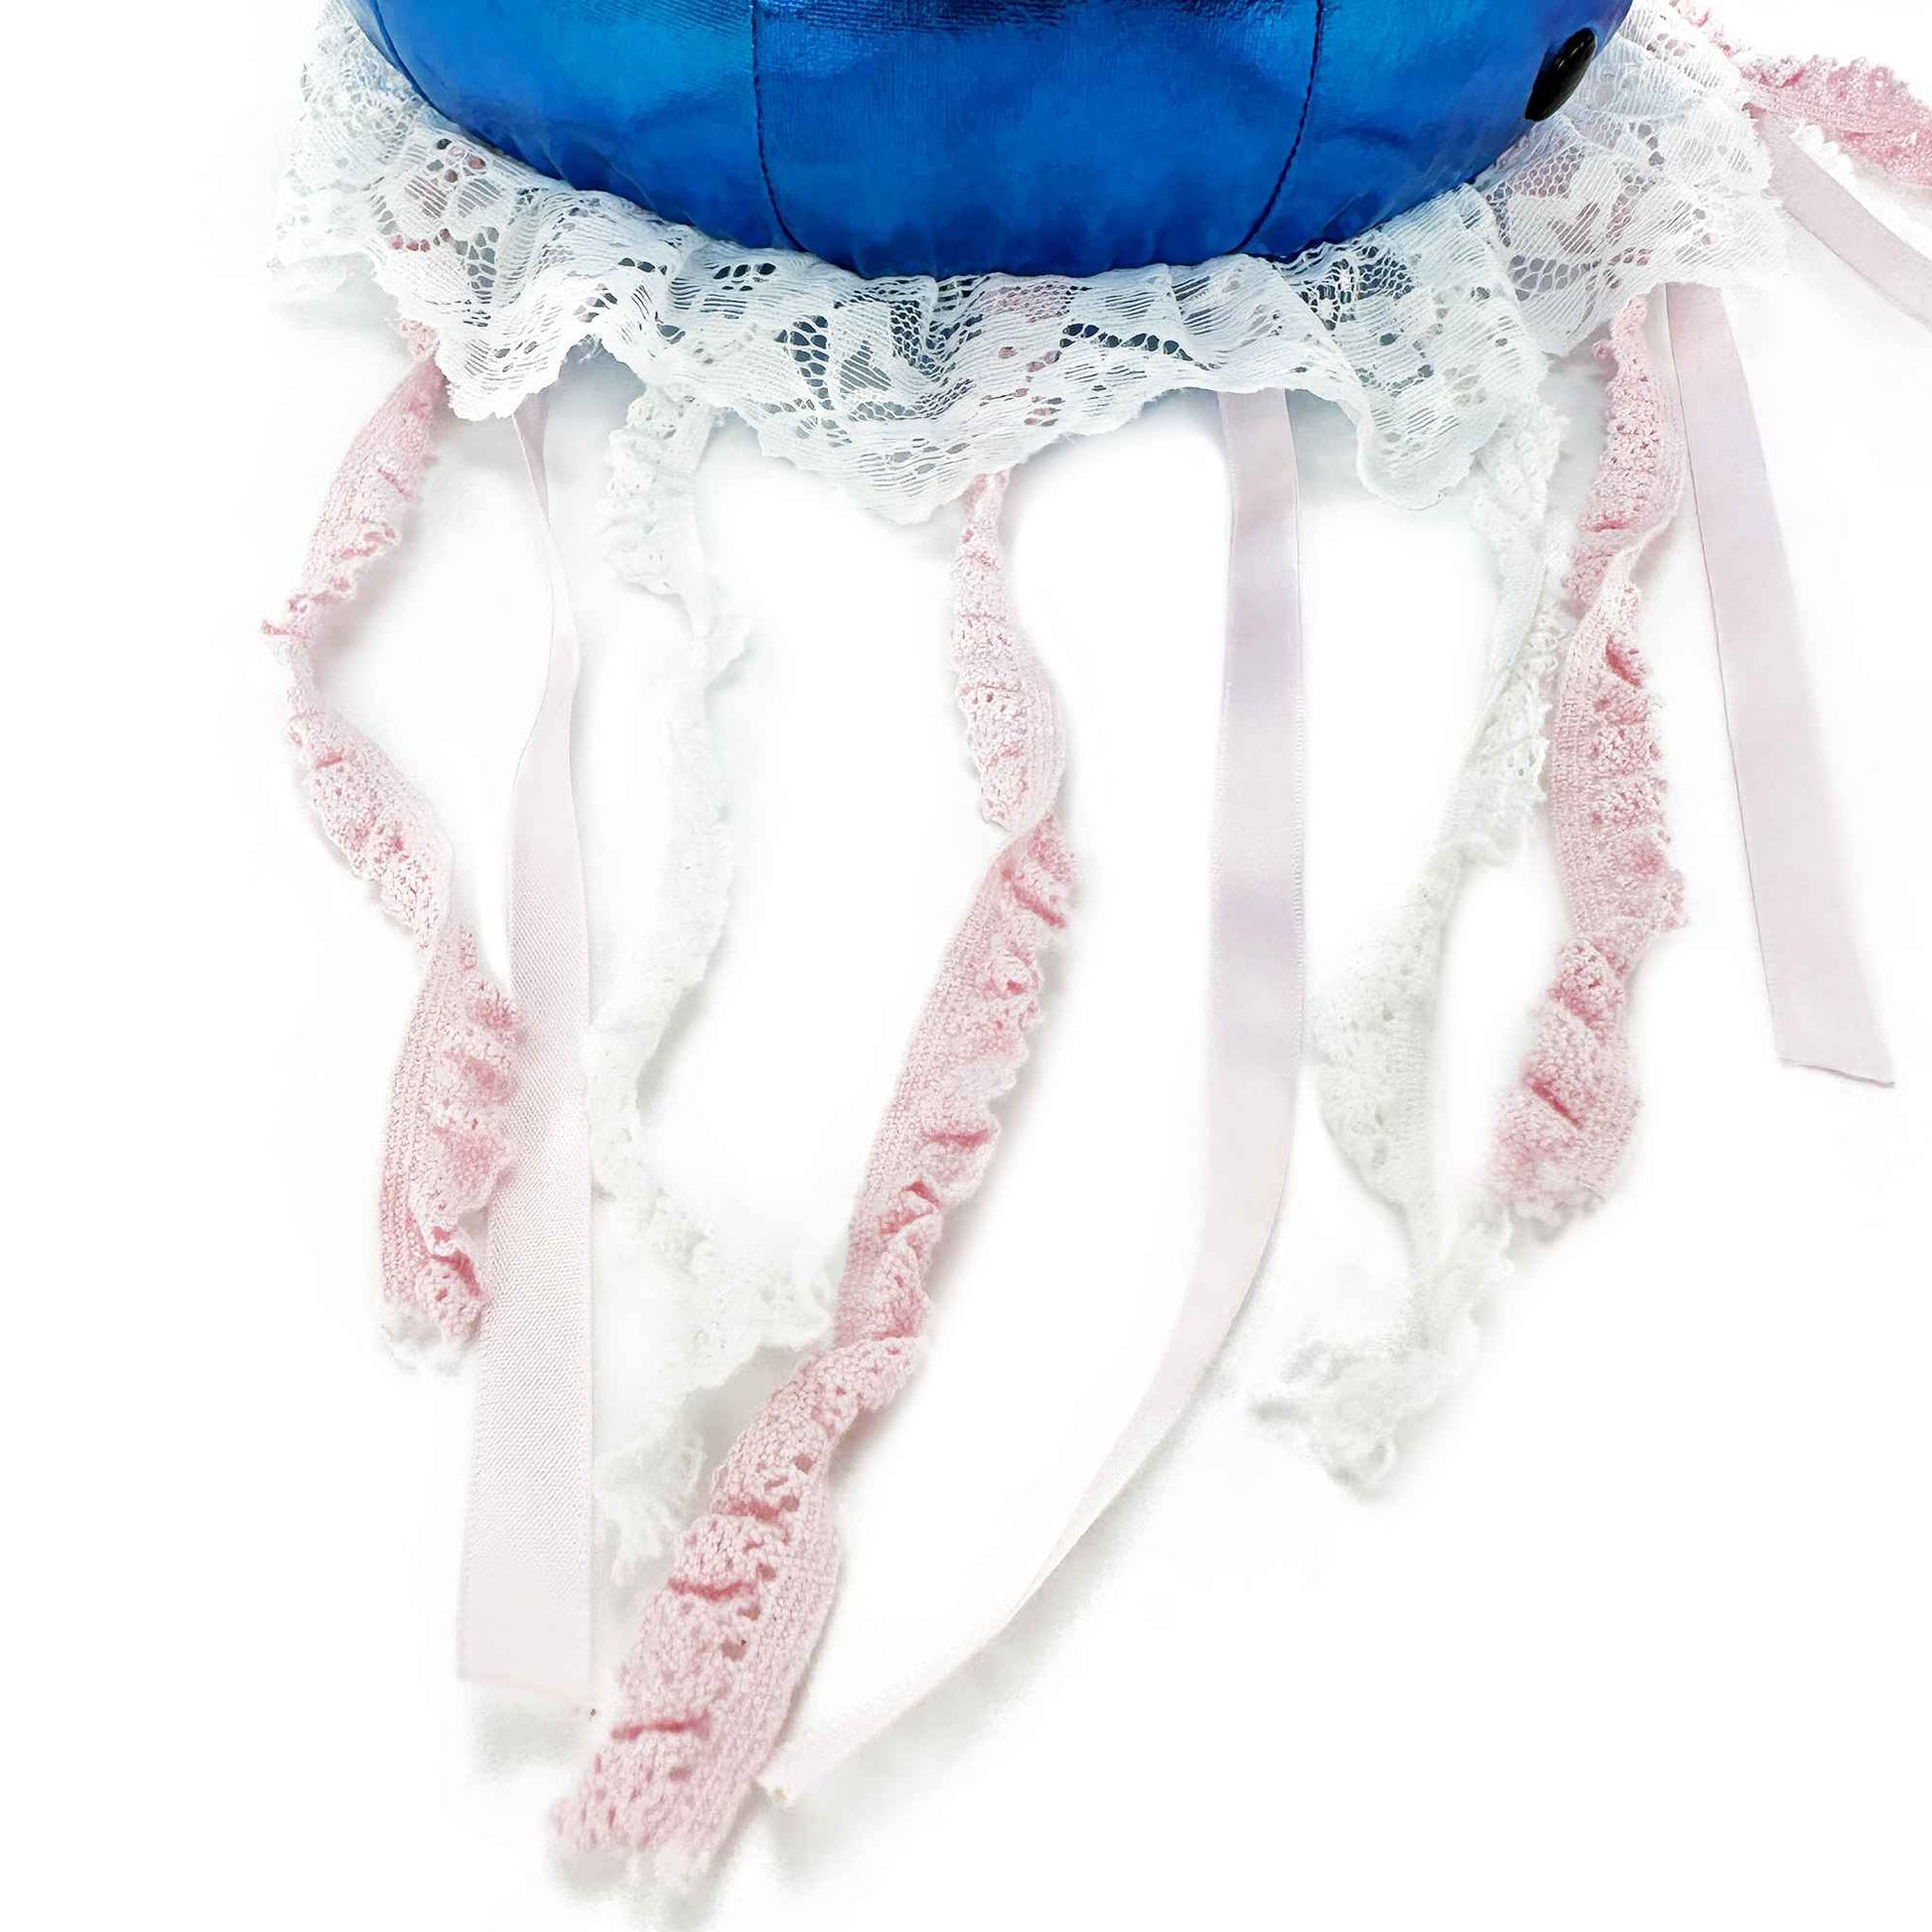 using lace material to imitate the tentacles of the jellyfish